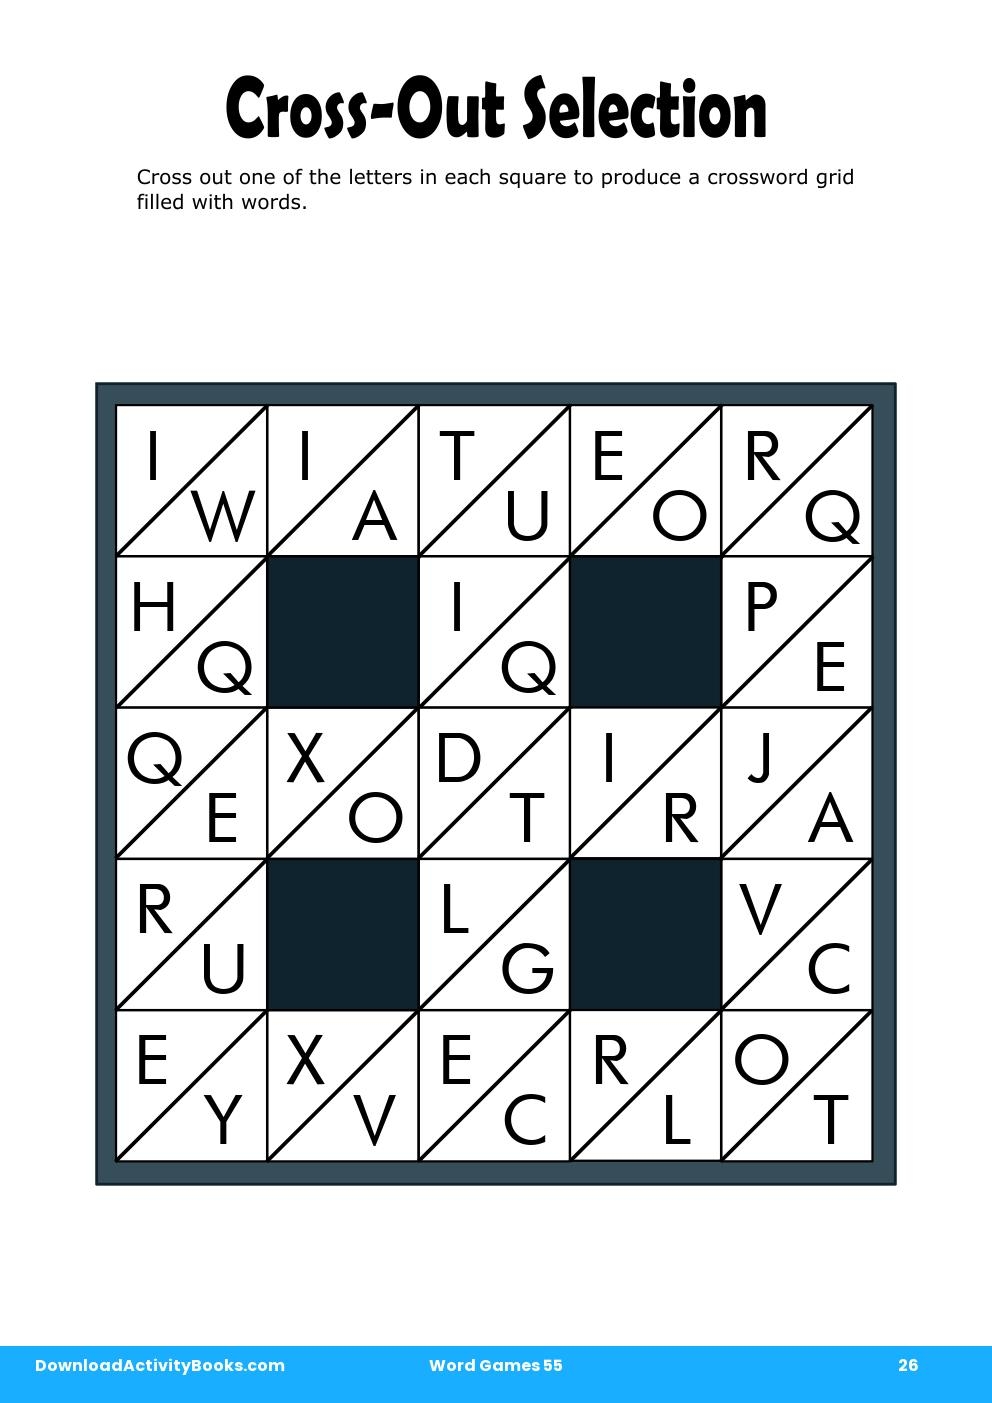 Cross-Out Selection in Word Games 55